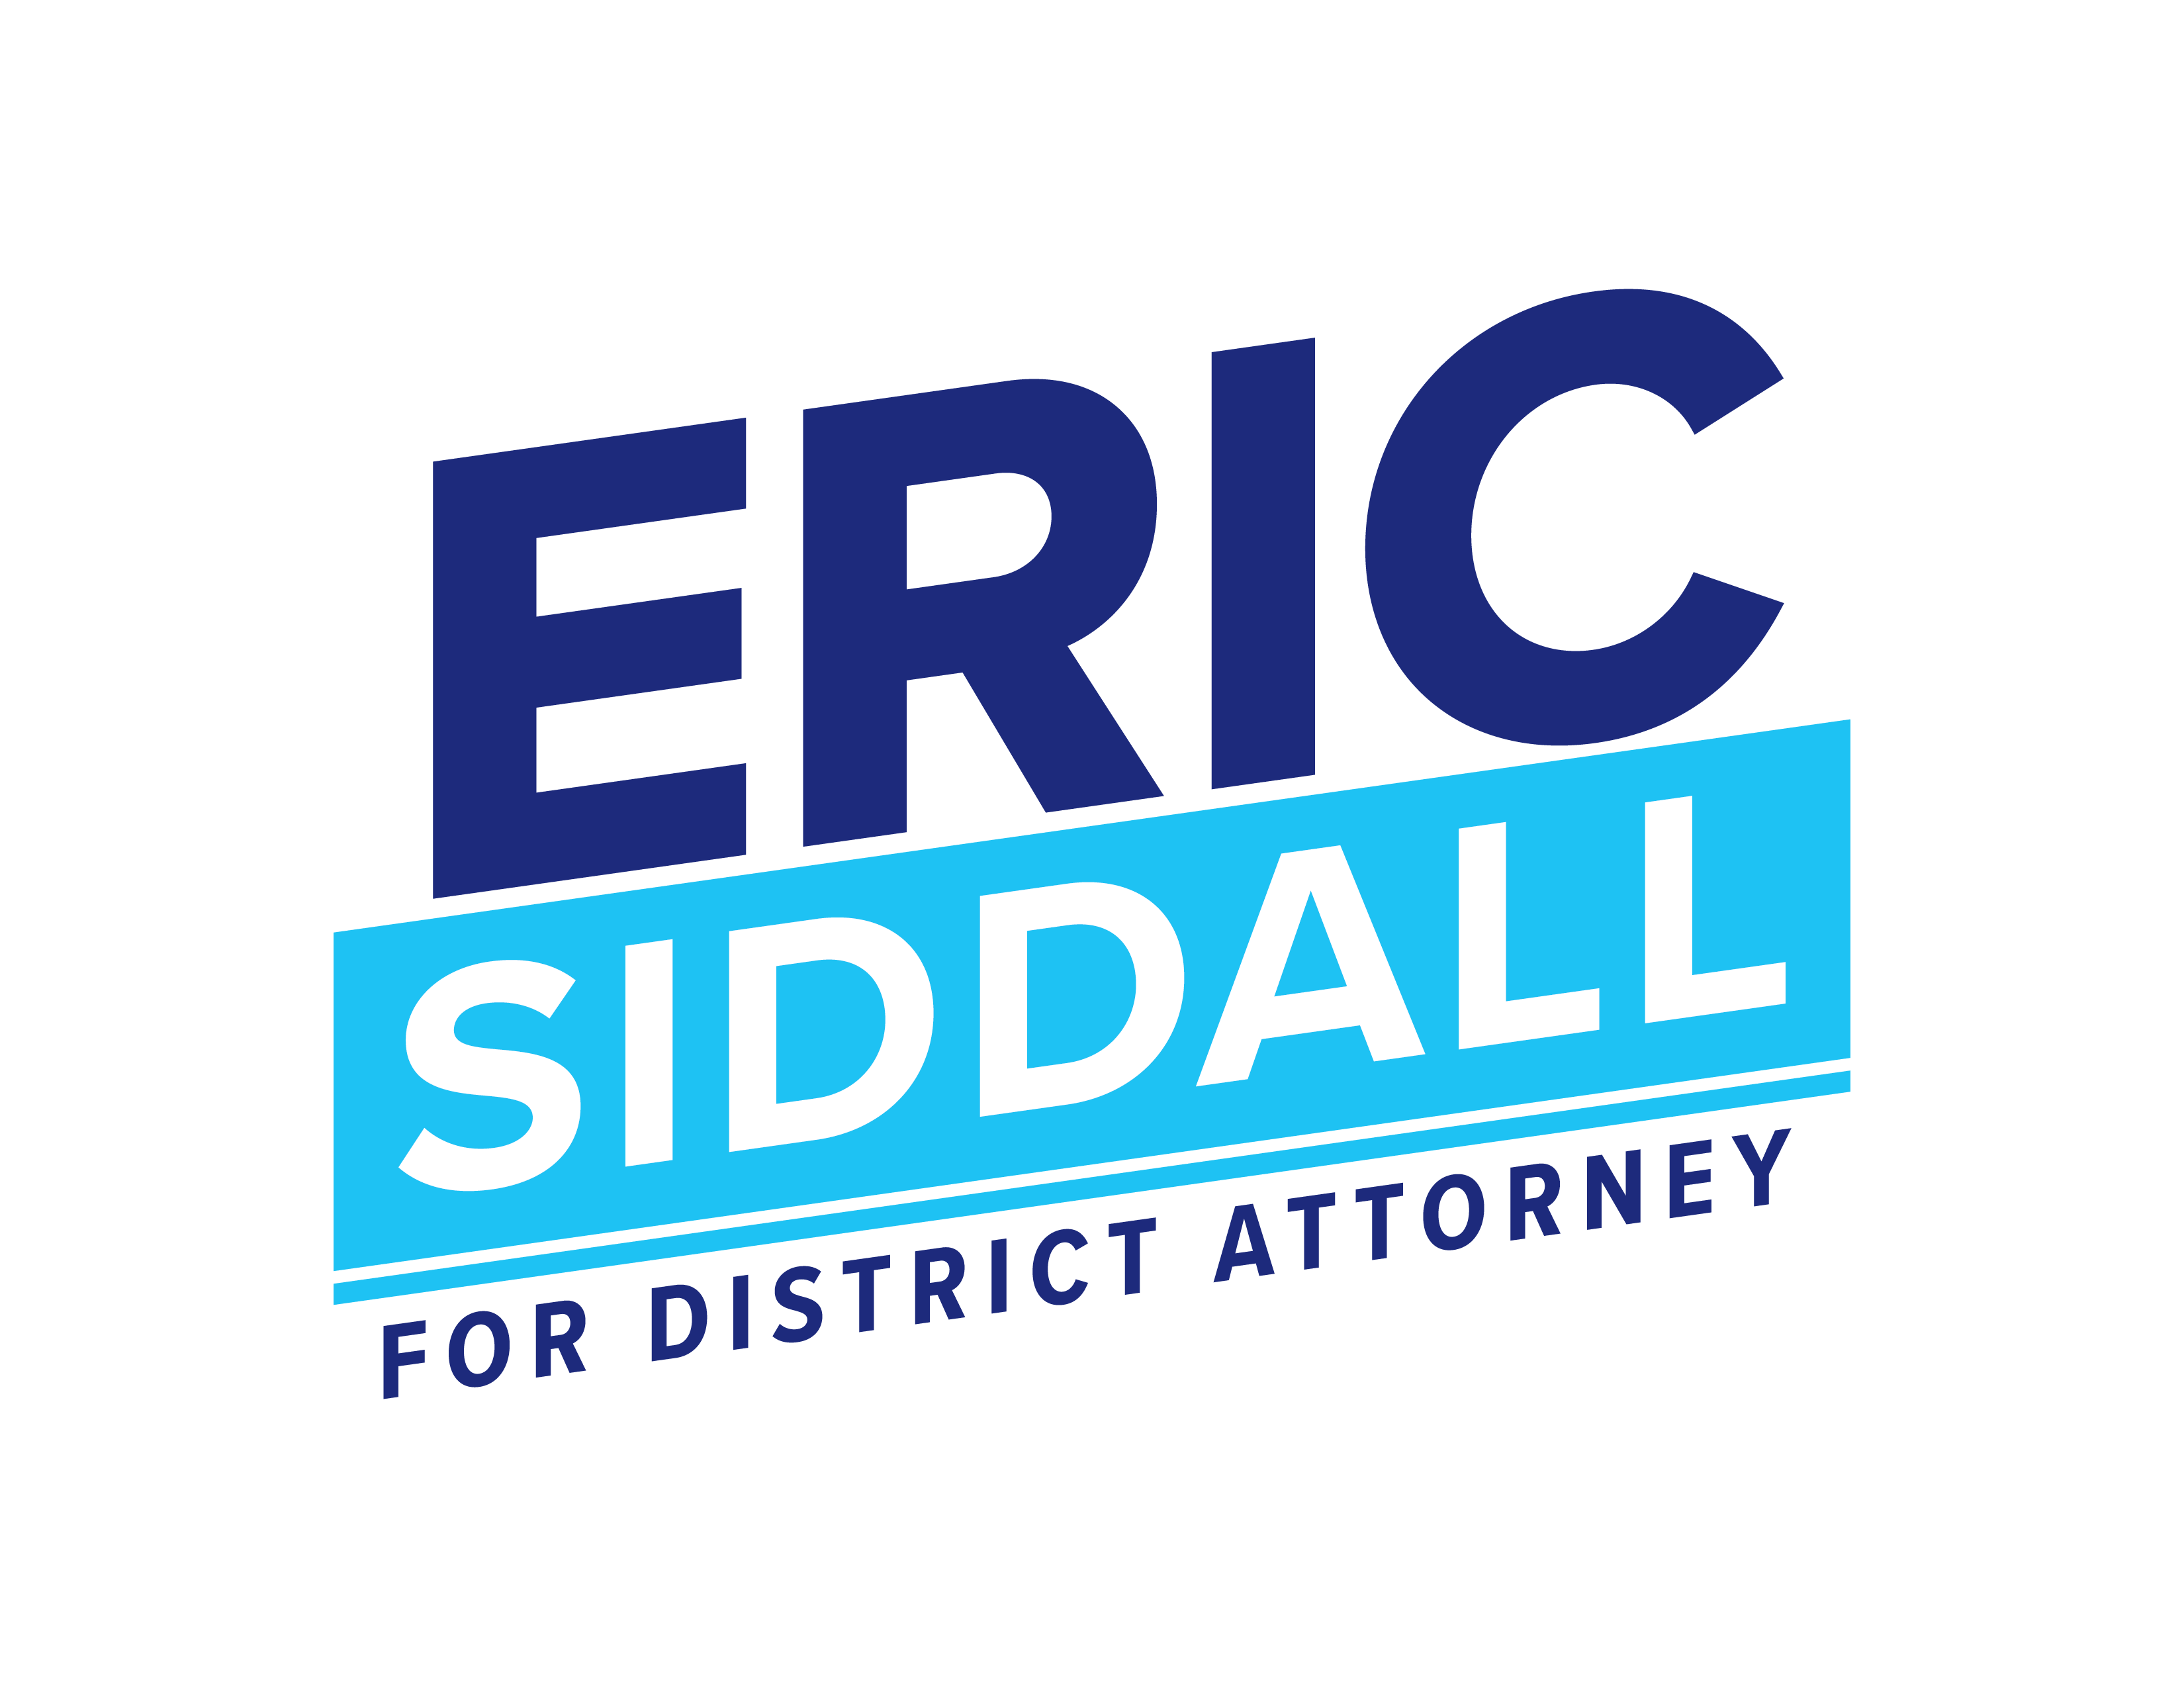 Eric Sapetto Siddall for District Attorney 2024